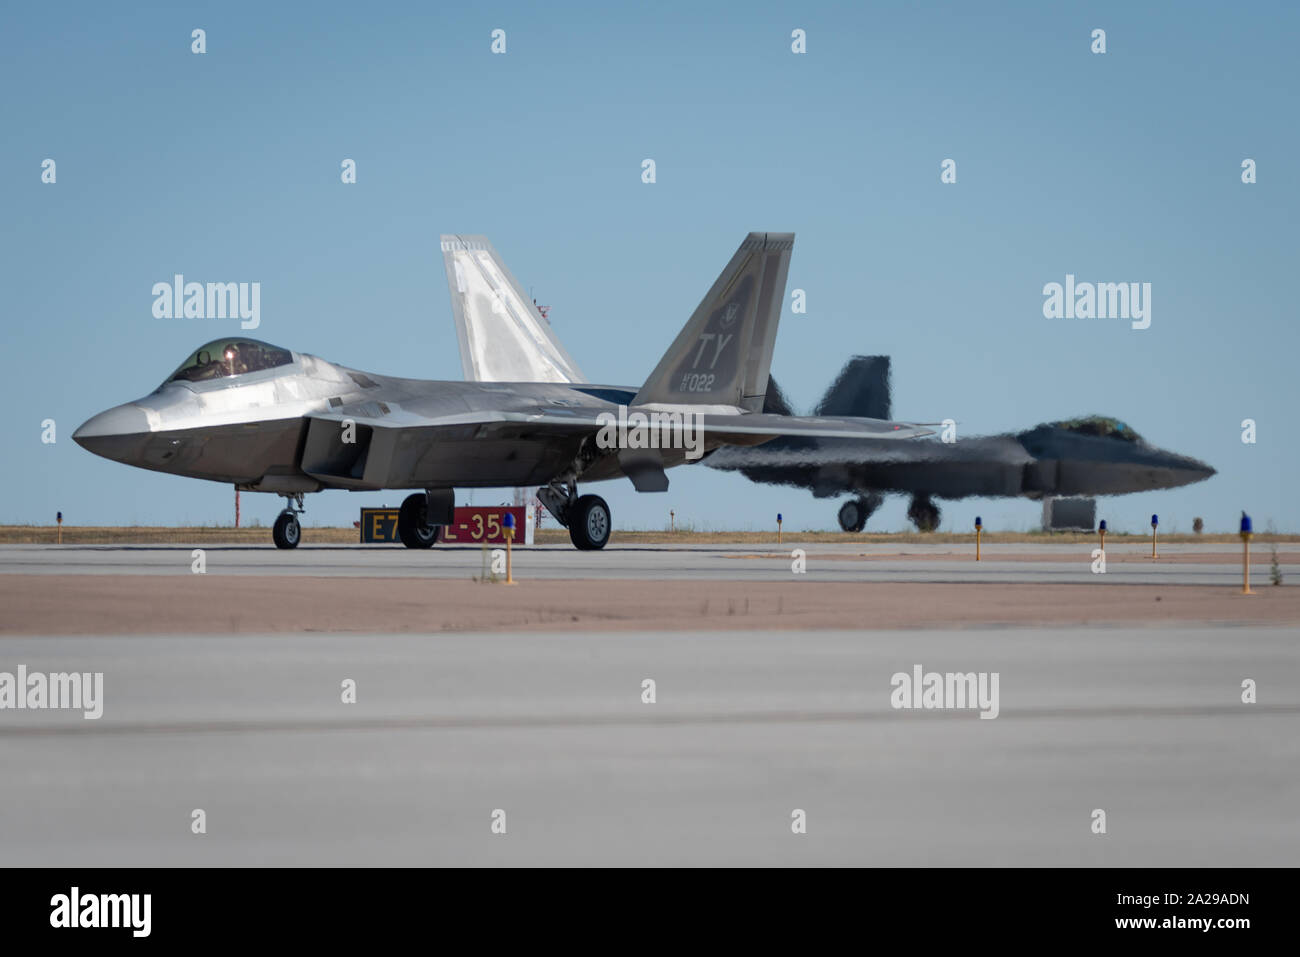 Two U.S. Air Force F-22 Raptors land in Colorado Springs, Colo. for the Pikes Peak Regional Air Show, Sep 19, 2019. Performing on behalf of Air Combat Command F-22 Demo Team, the 13-member team travels to 25 air shows a season to showcase the performance and capabilities of the world's premier 5th-generation fighter. (U.S. Air Force photo by 2nd Lt. Sam Eckholm) Stock Photo